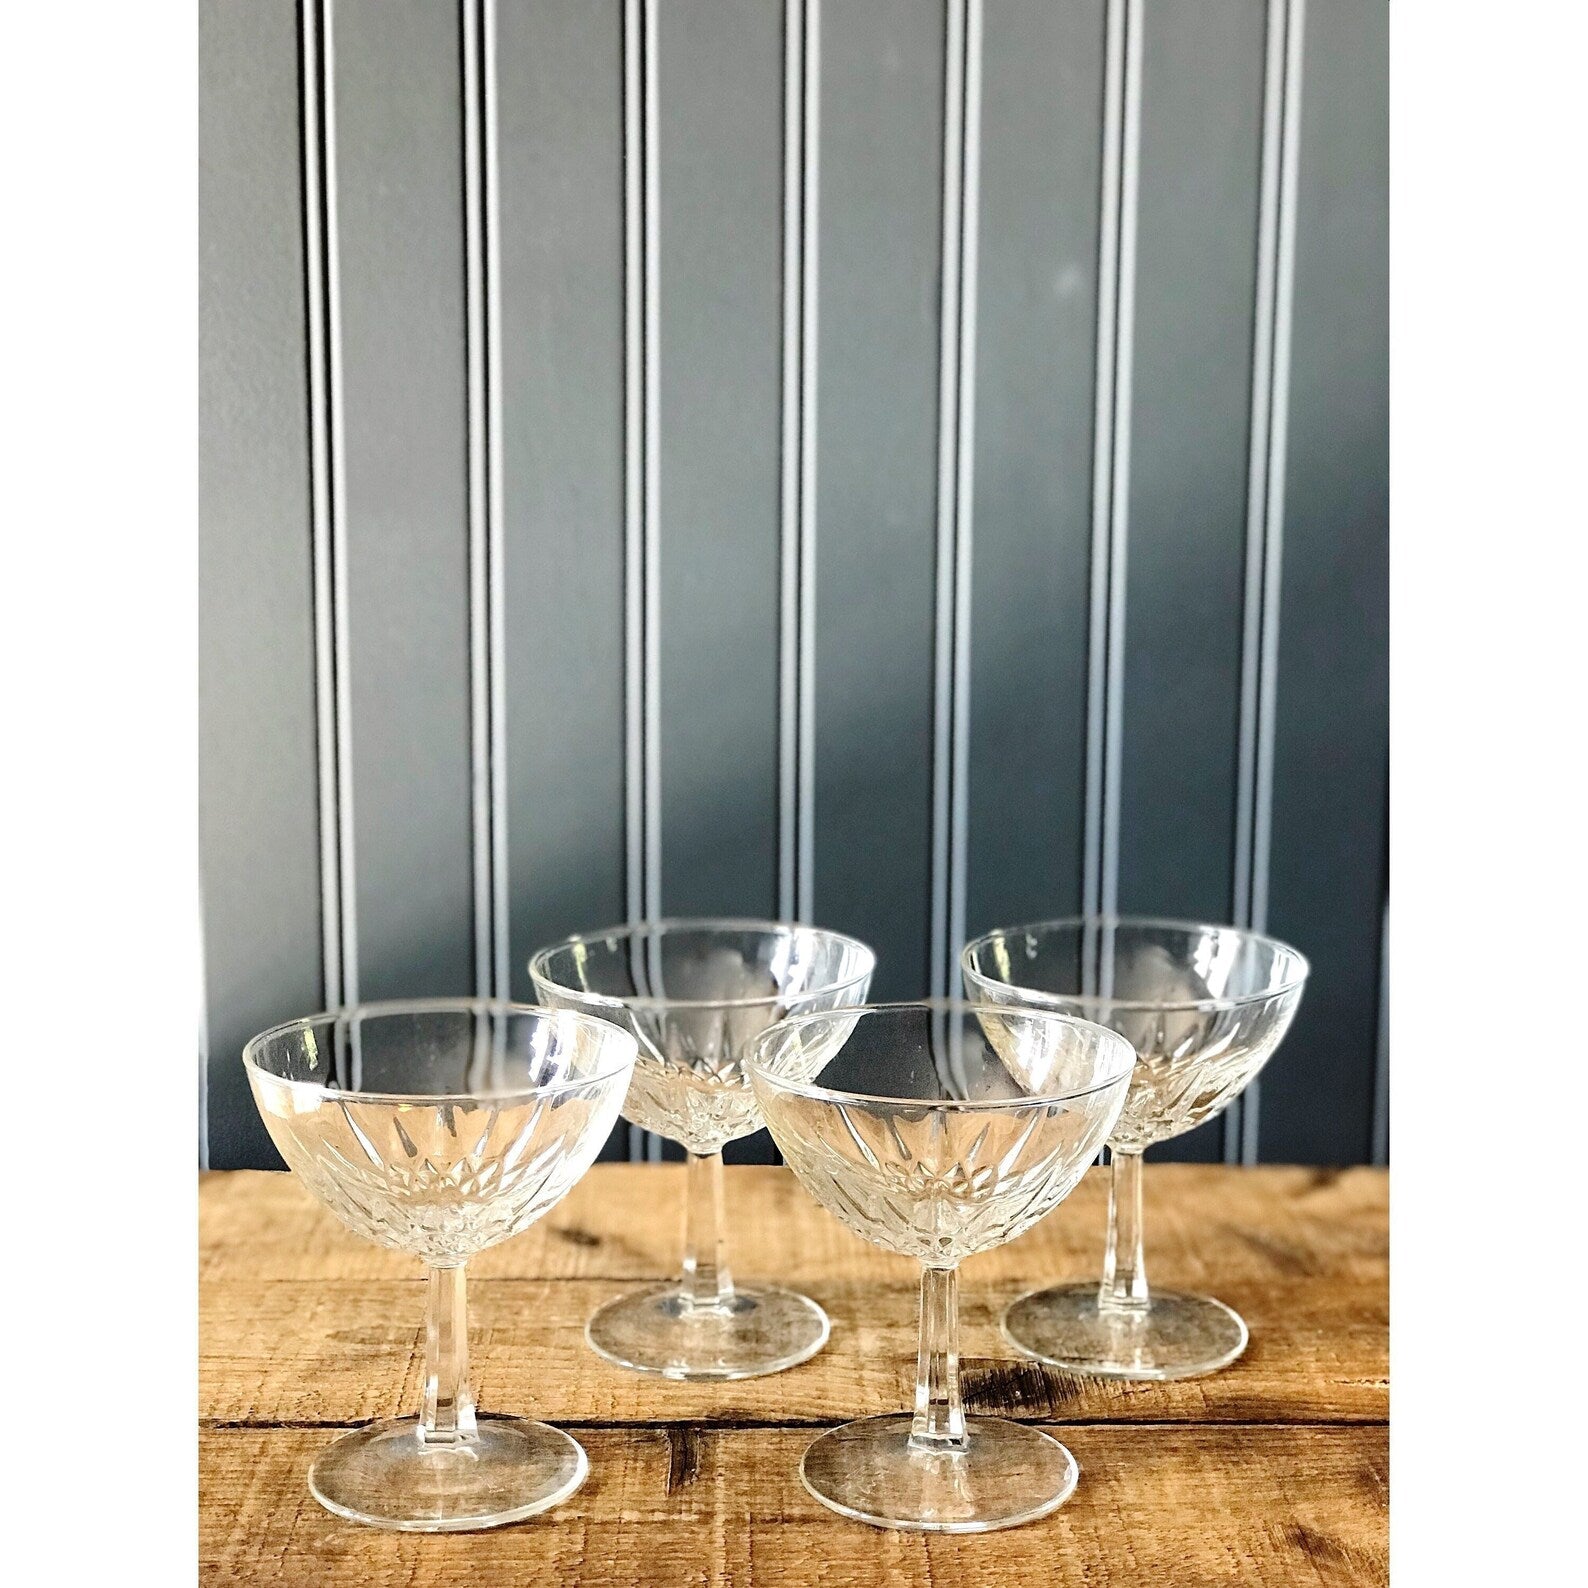 Vintage Champagne Coupe Glasses, Set of 4